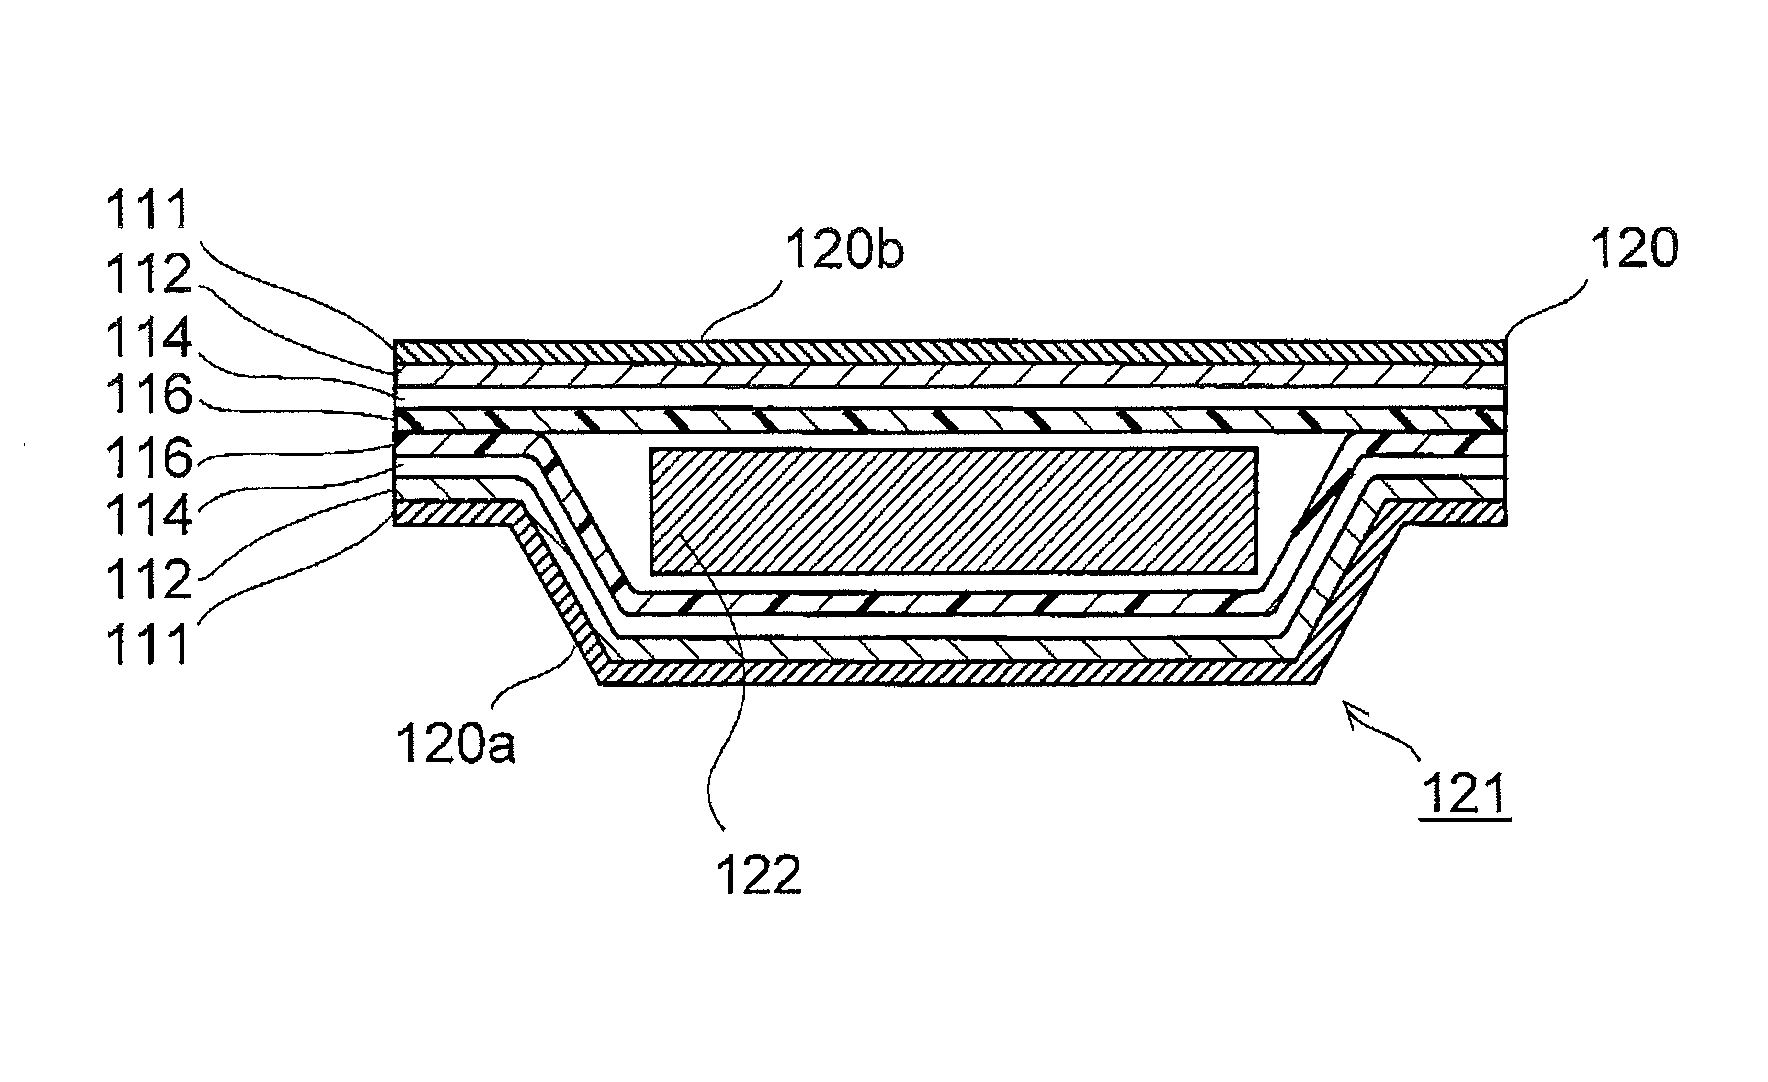 Electrochemical cell packaging material